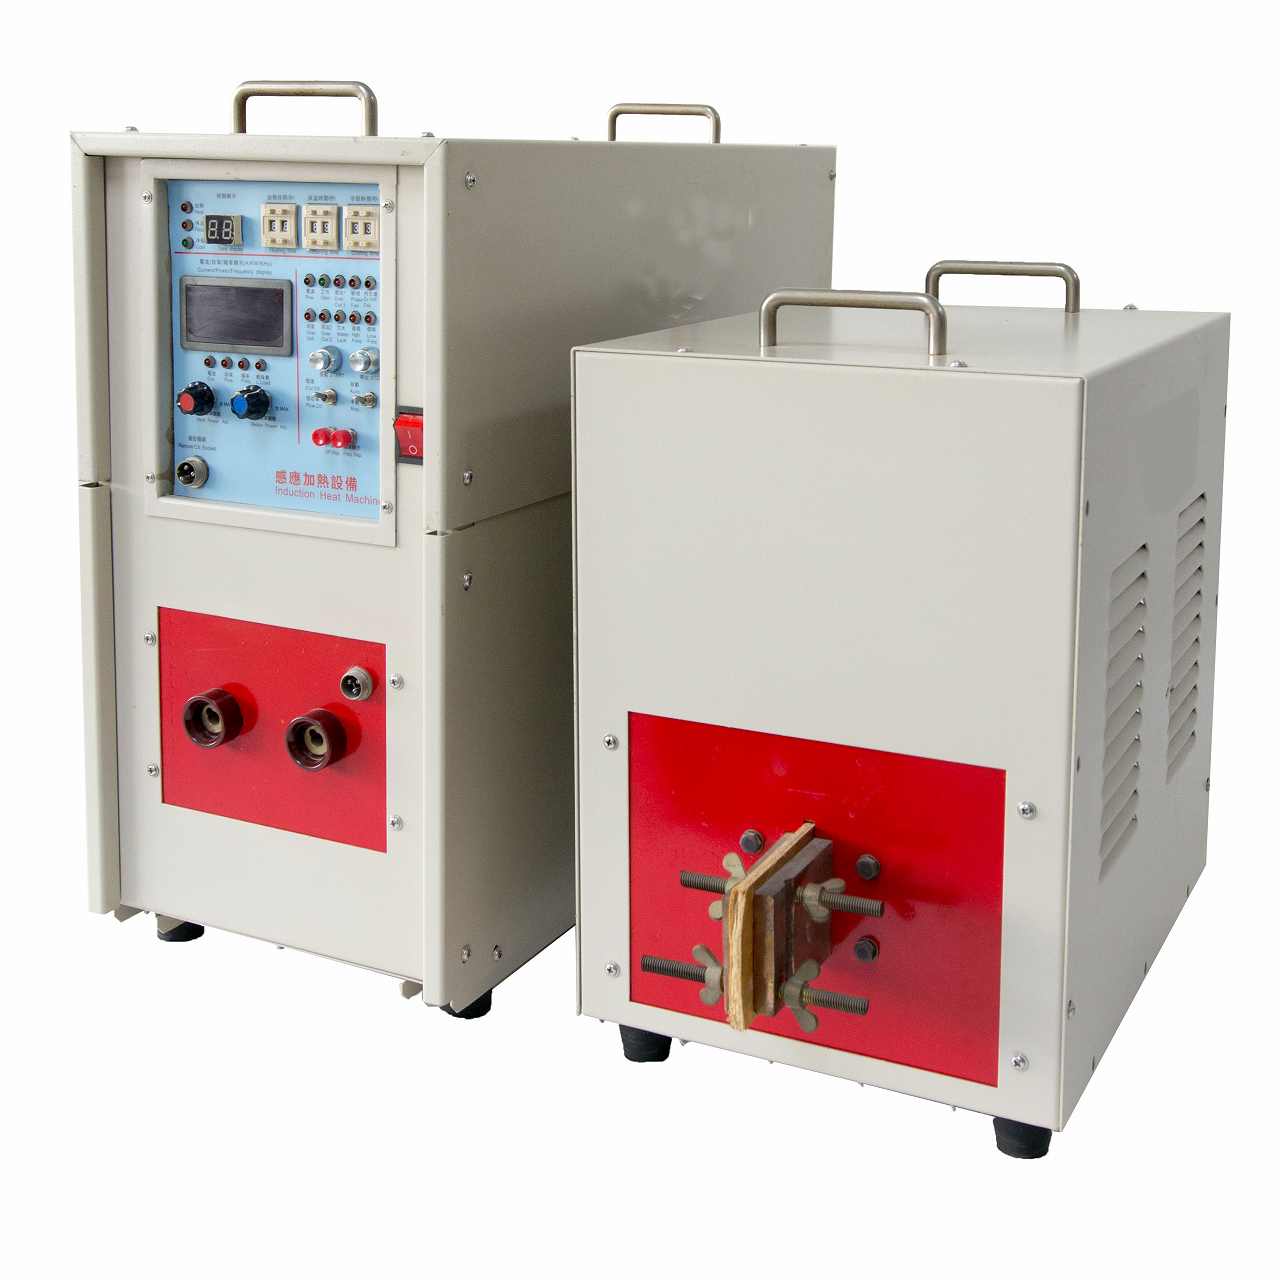 induction heater manufacturers in india.jpg